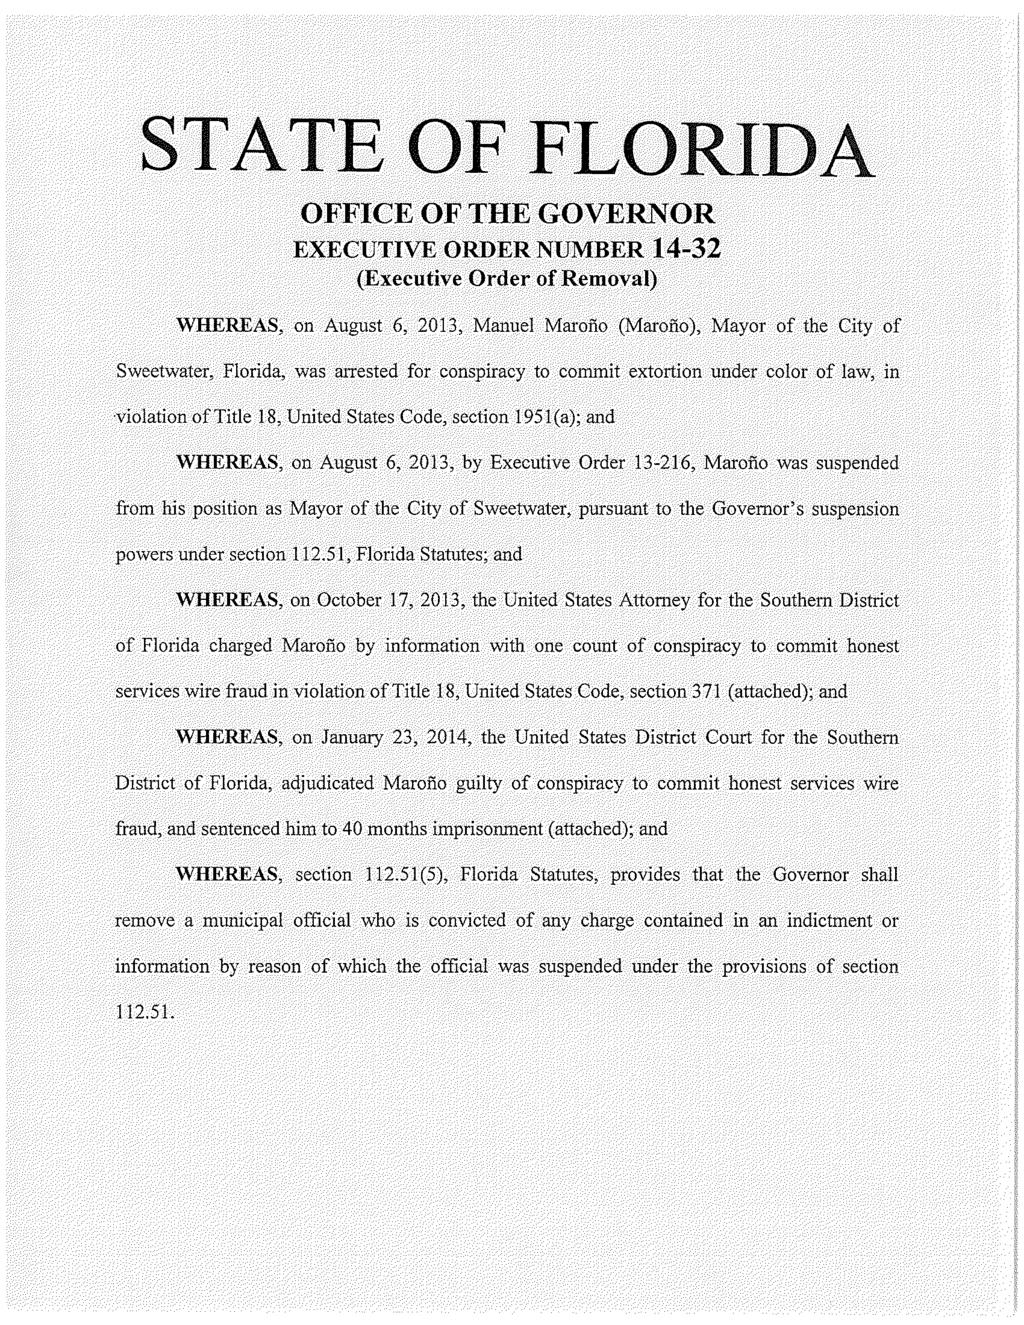 STATE OF FLORIDA OFFICE OF THE GOVERNOR EXECUTIVE ORDER NUMBER 14-32 (Executive Order of Removal) WHEREAS, on August 6, 2013, Manuel Marofio (Marofio), Mayor of the City of Sweetwater, Florida, was